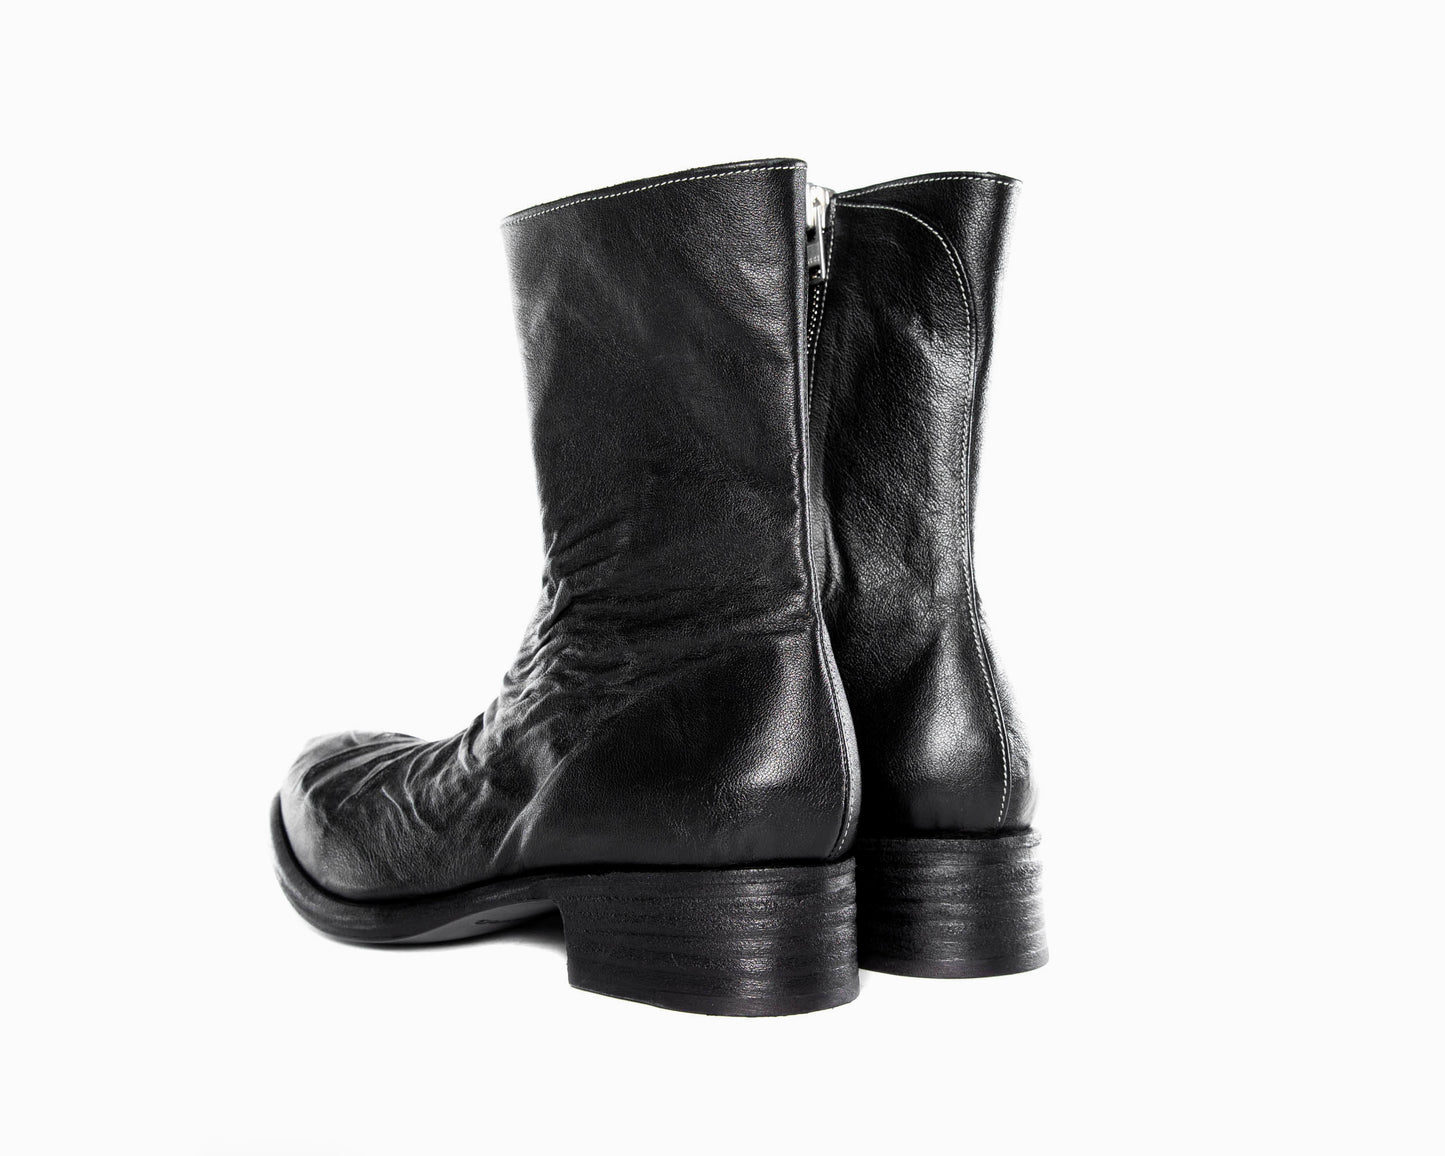 Black Wrinkle Creases Calf Leather Side Zipper CONSERVATIVE Boots by SODERBERG